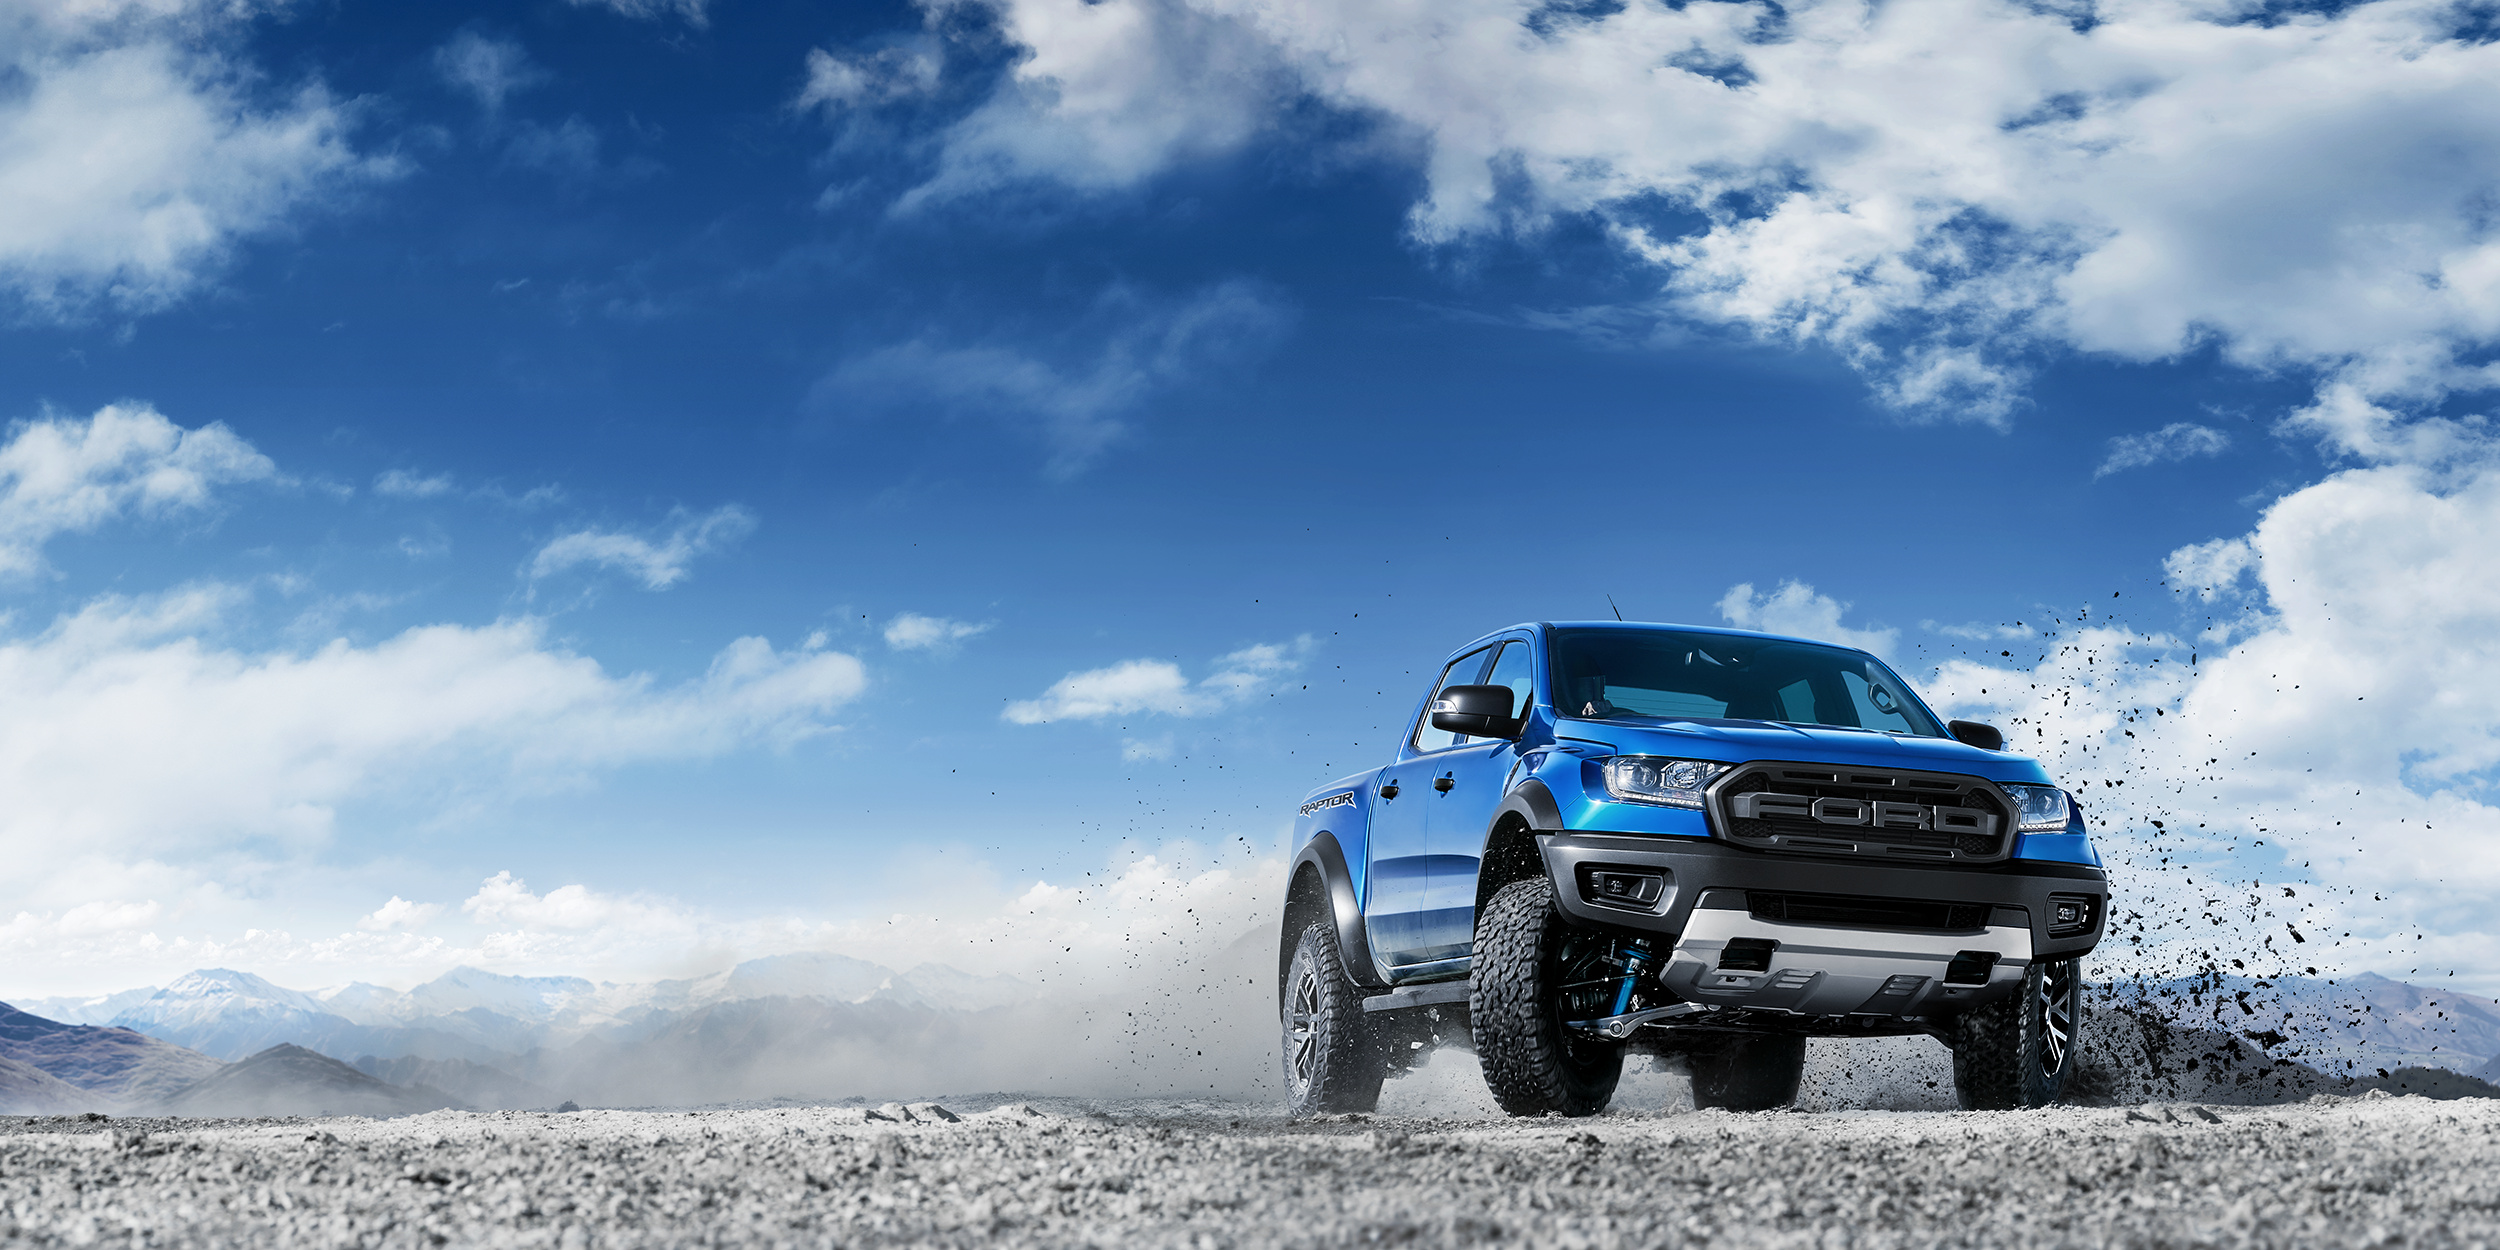 Ford Ranger: Raptor, The company introduced the first model based on the T6 platform in 2011. 2500x1250 Dual Screen Background.